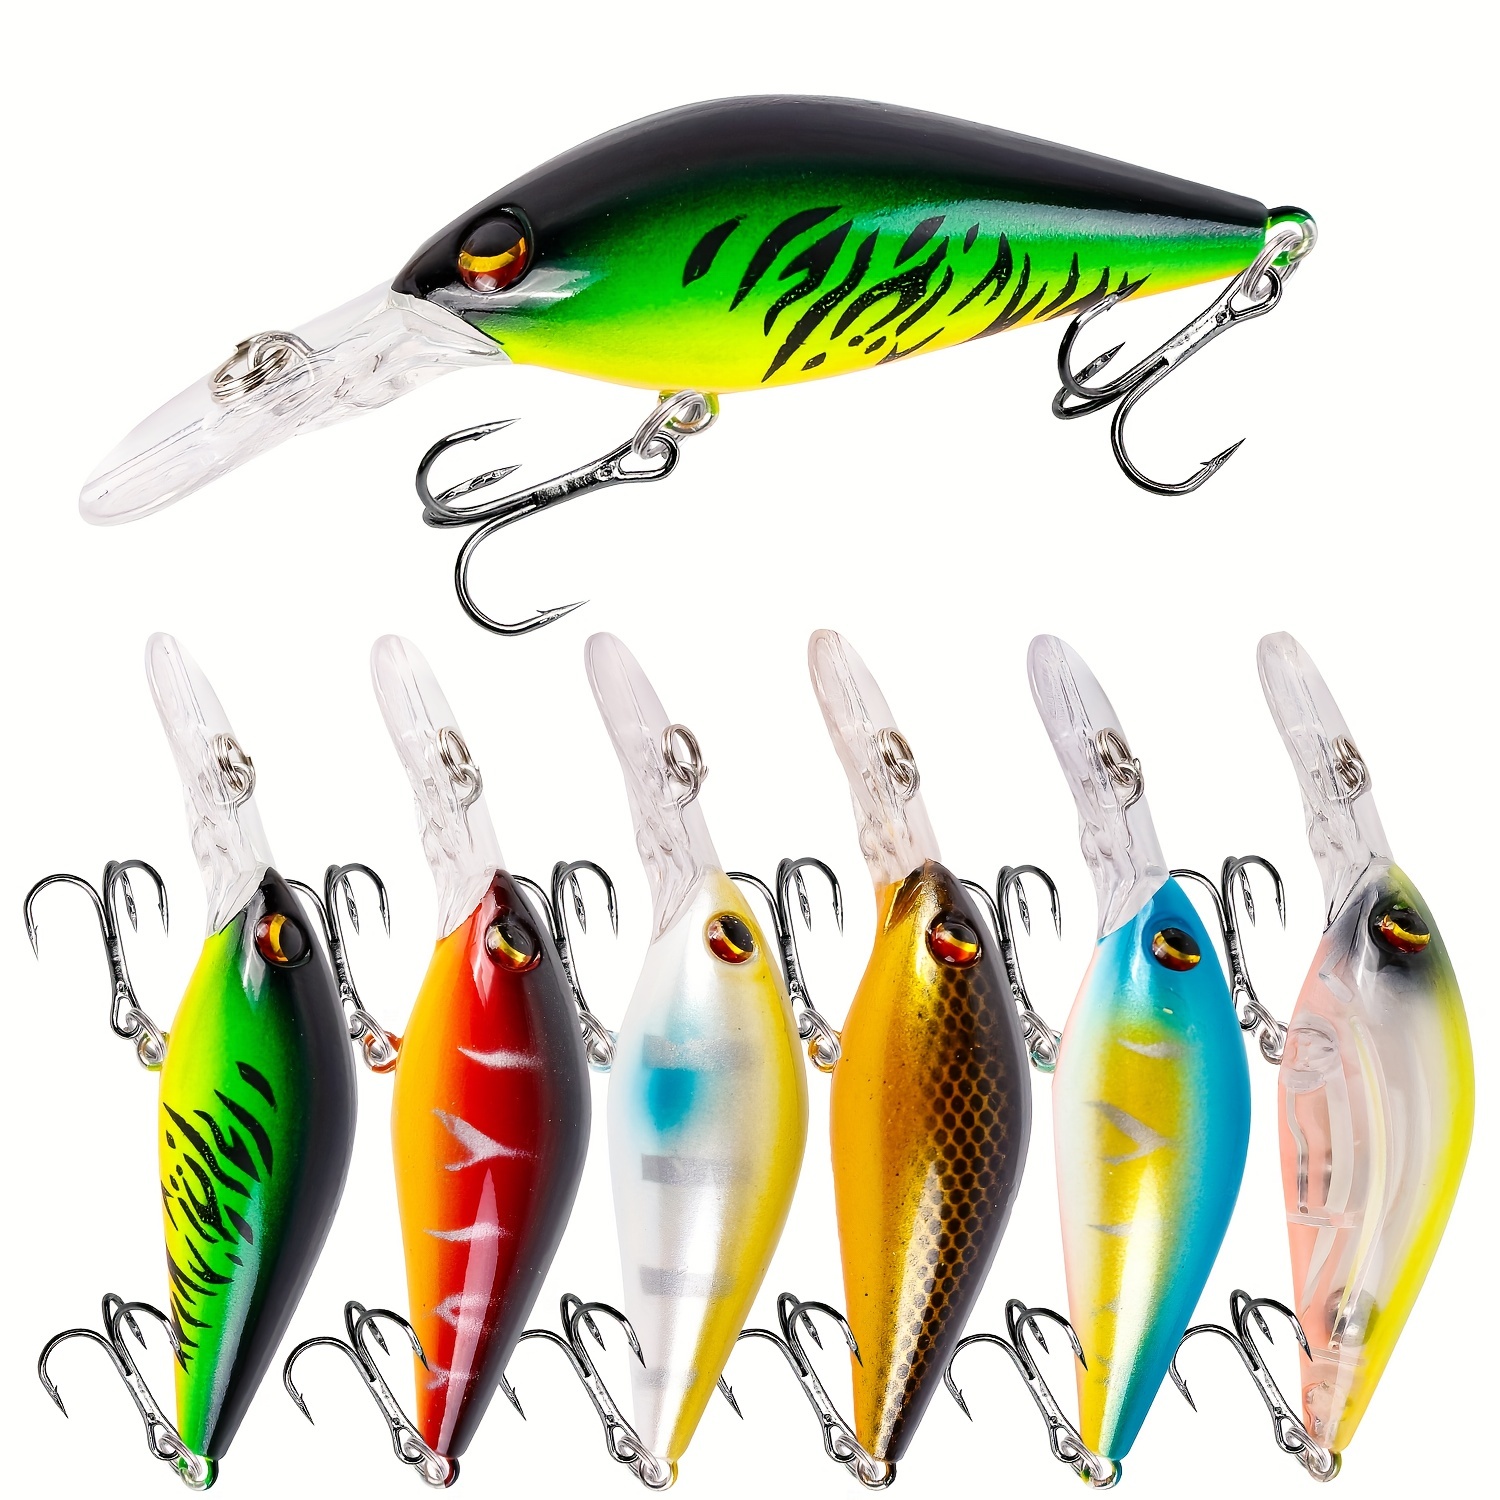 Outdoor Fishing Luring Fish to The Hook Fish Hooks 1Pcs 4.5cm 3.5g Feather  Bee Fishing Lure Crankbait Freshwater Pesca Artificial Insect Bait Wobbler